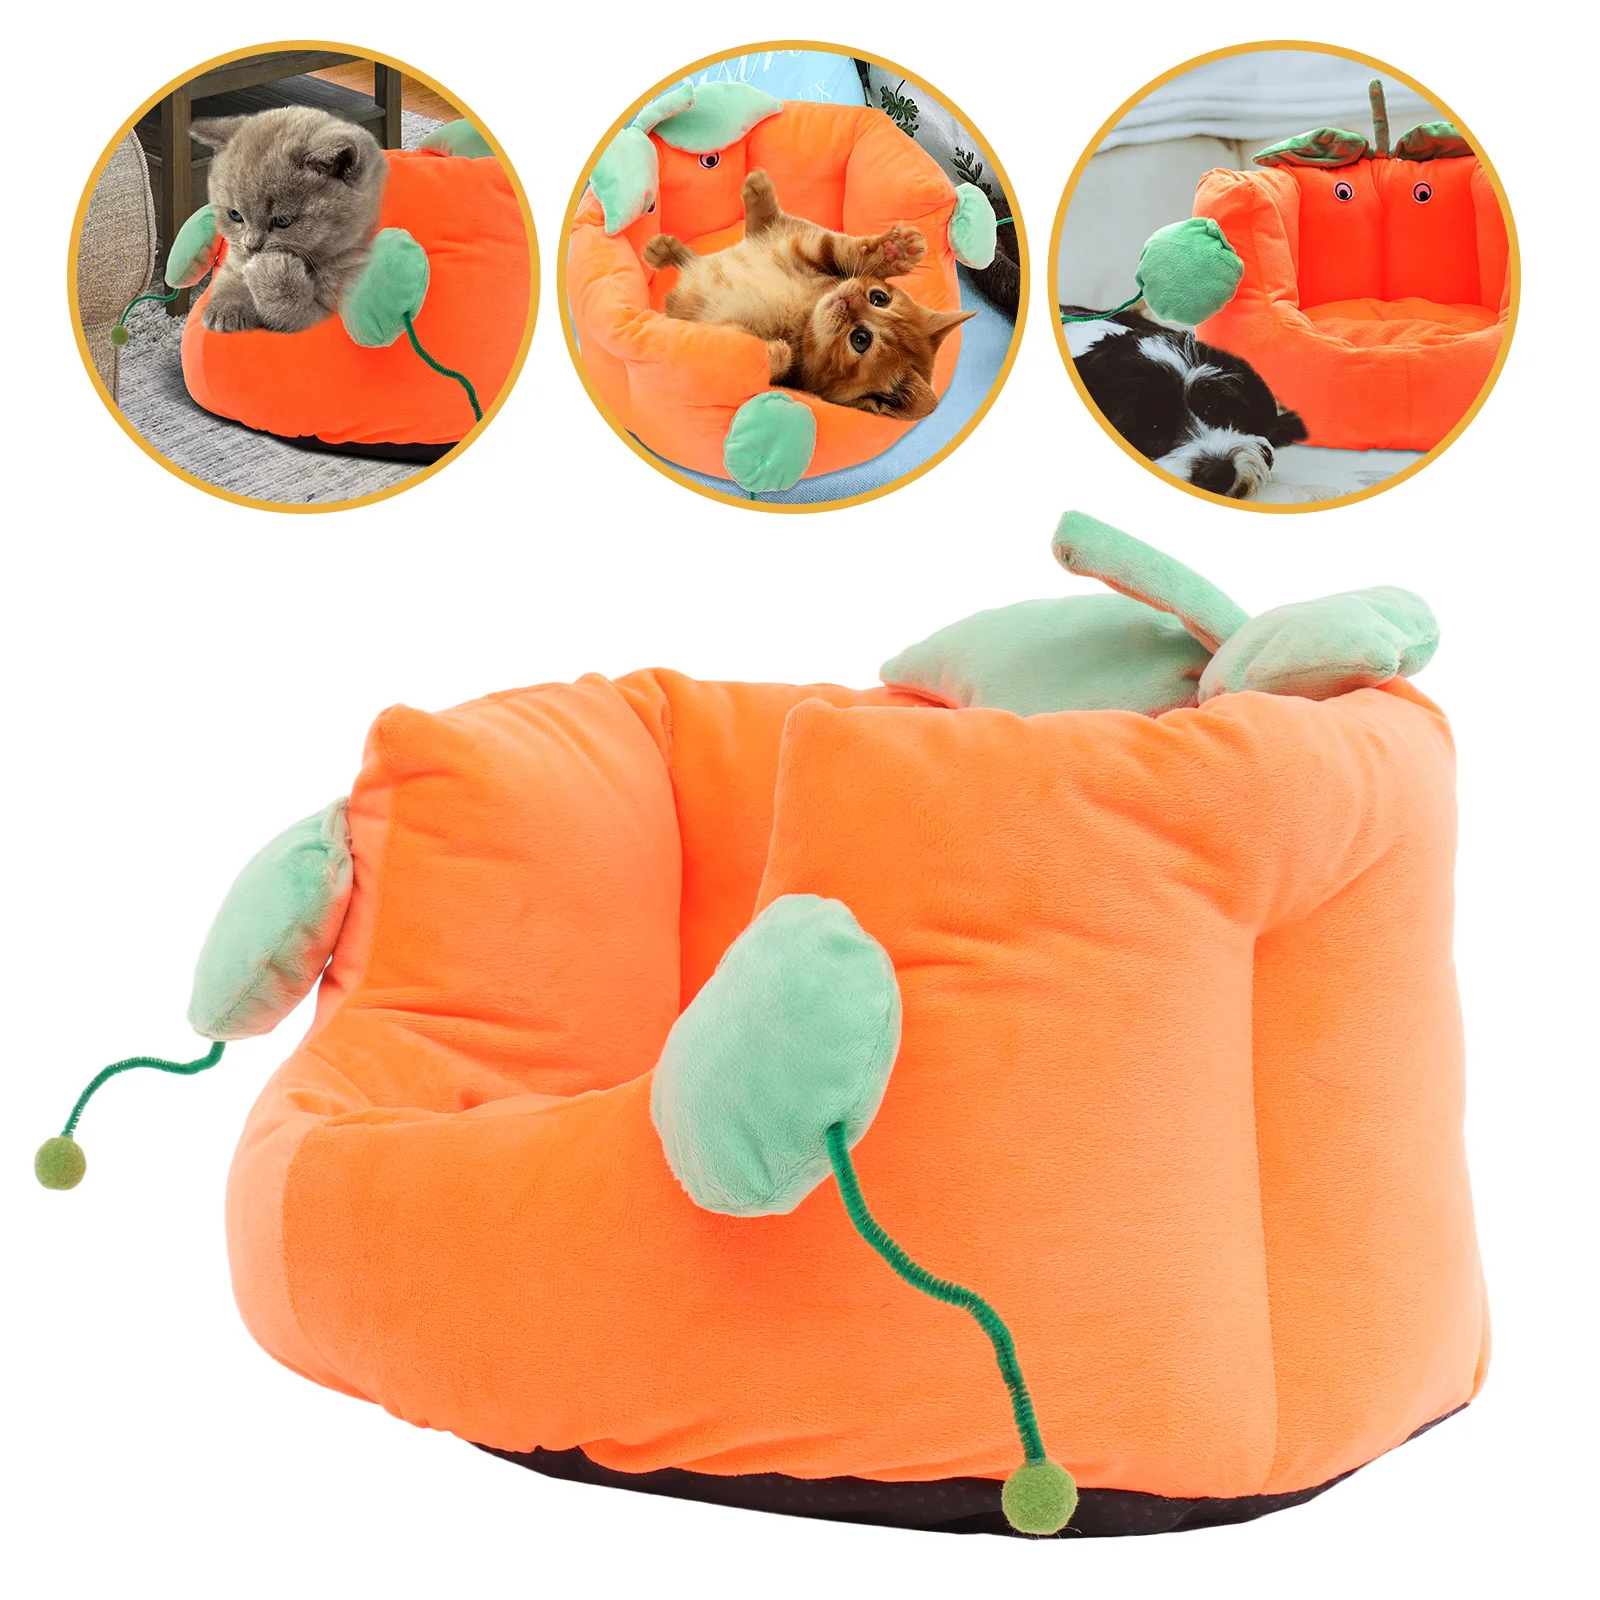 

Winter Dog House Stuffed Puppy Puppy Warm Mat Dog Warm Mat Dog Sleeping Bed Small Animal Bed Pets Cuddle Cave Chair Tent